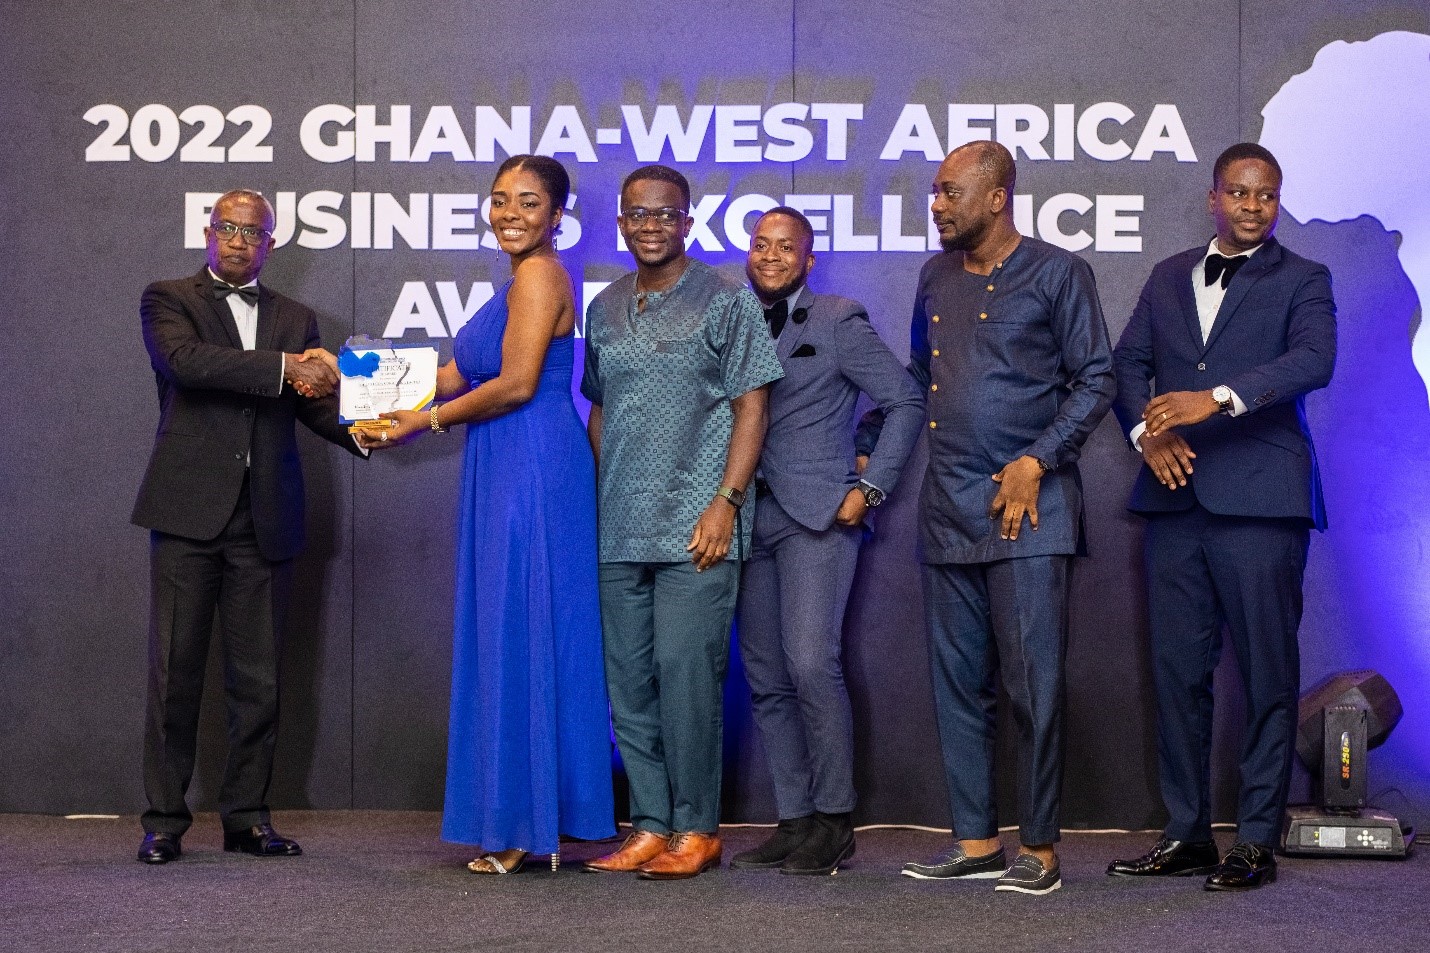 Outstanding businesses awarded at the Ghana West Africa Business Excellence Awards